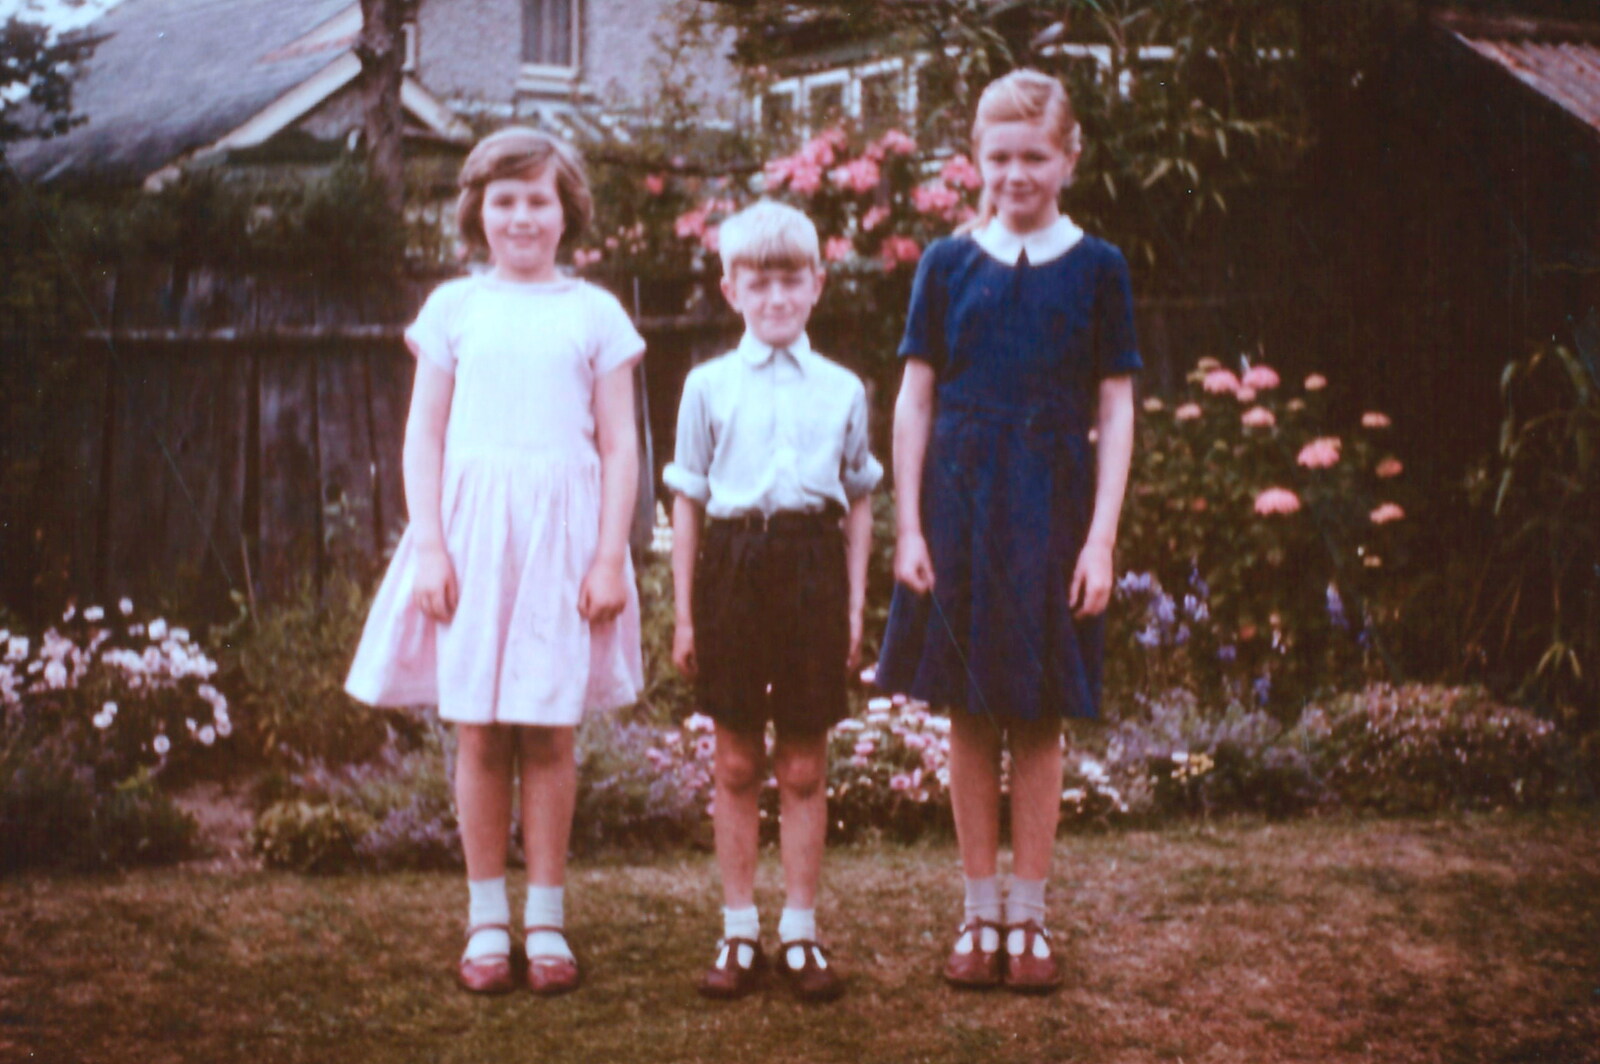 Judith, Neil and Janet at what looks like Danesbury Avenue, 1959? from Family History: The 1940s and 1950s - 24th January 2020